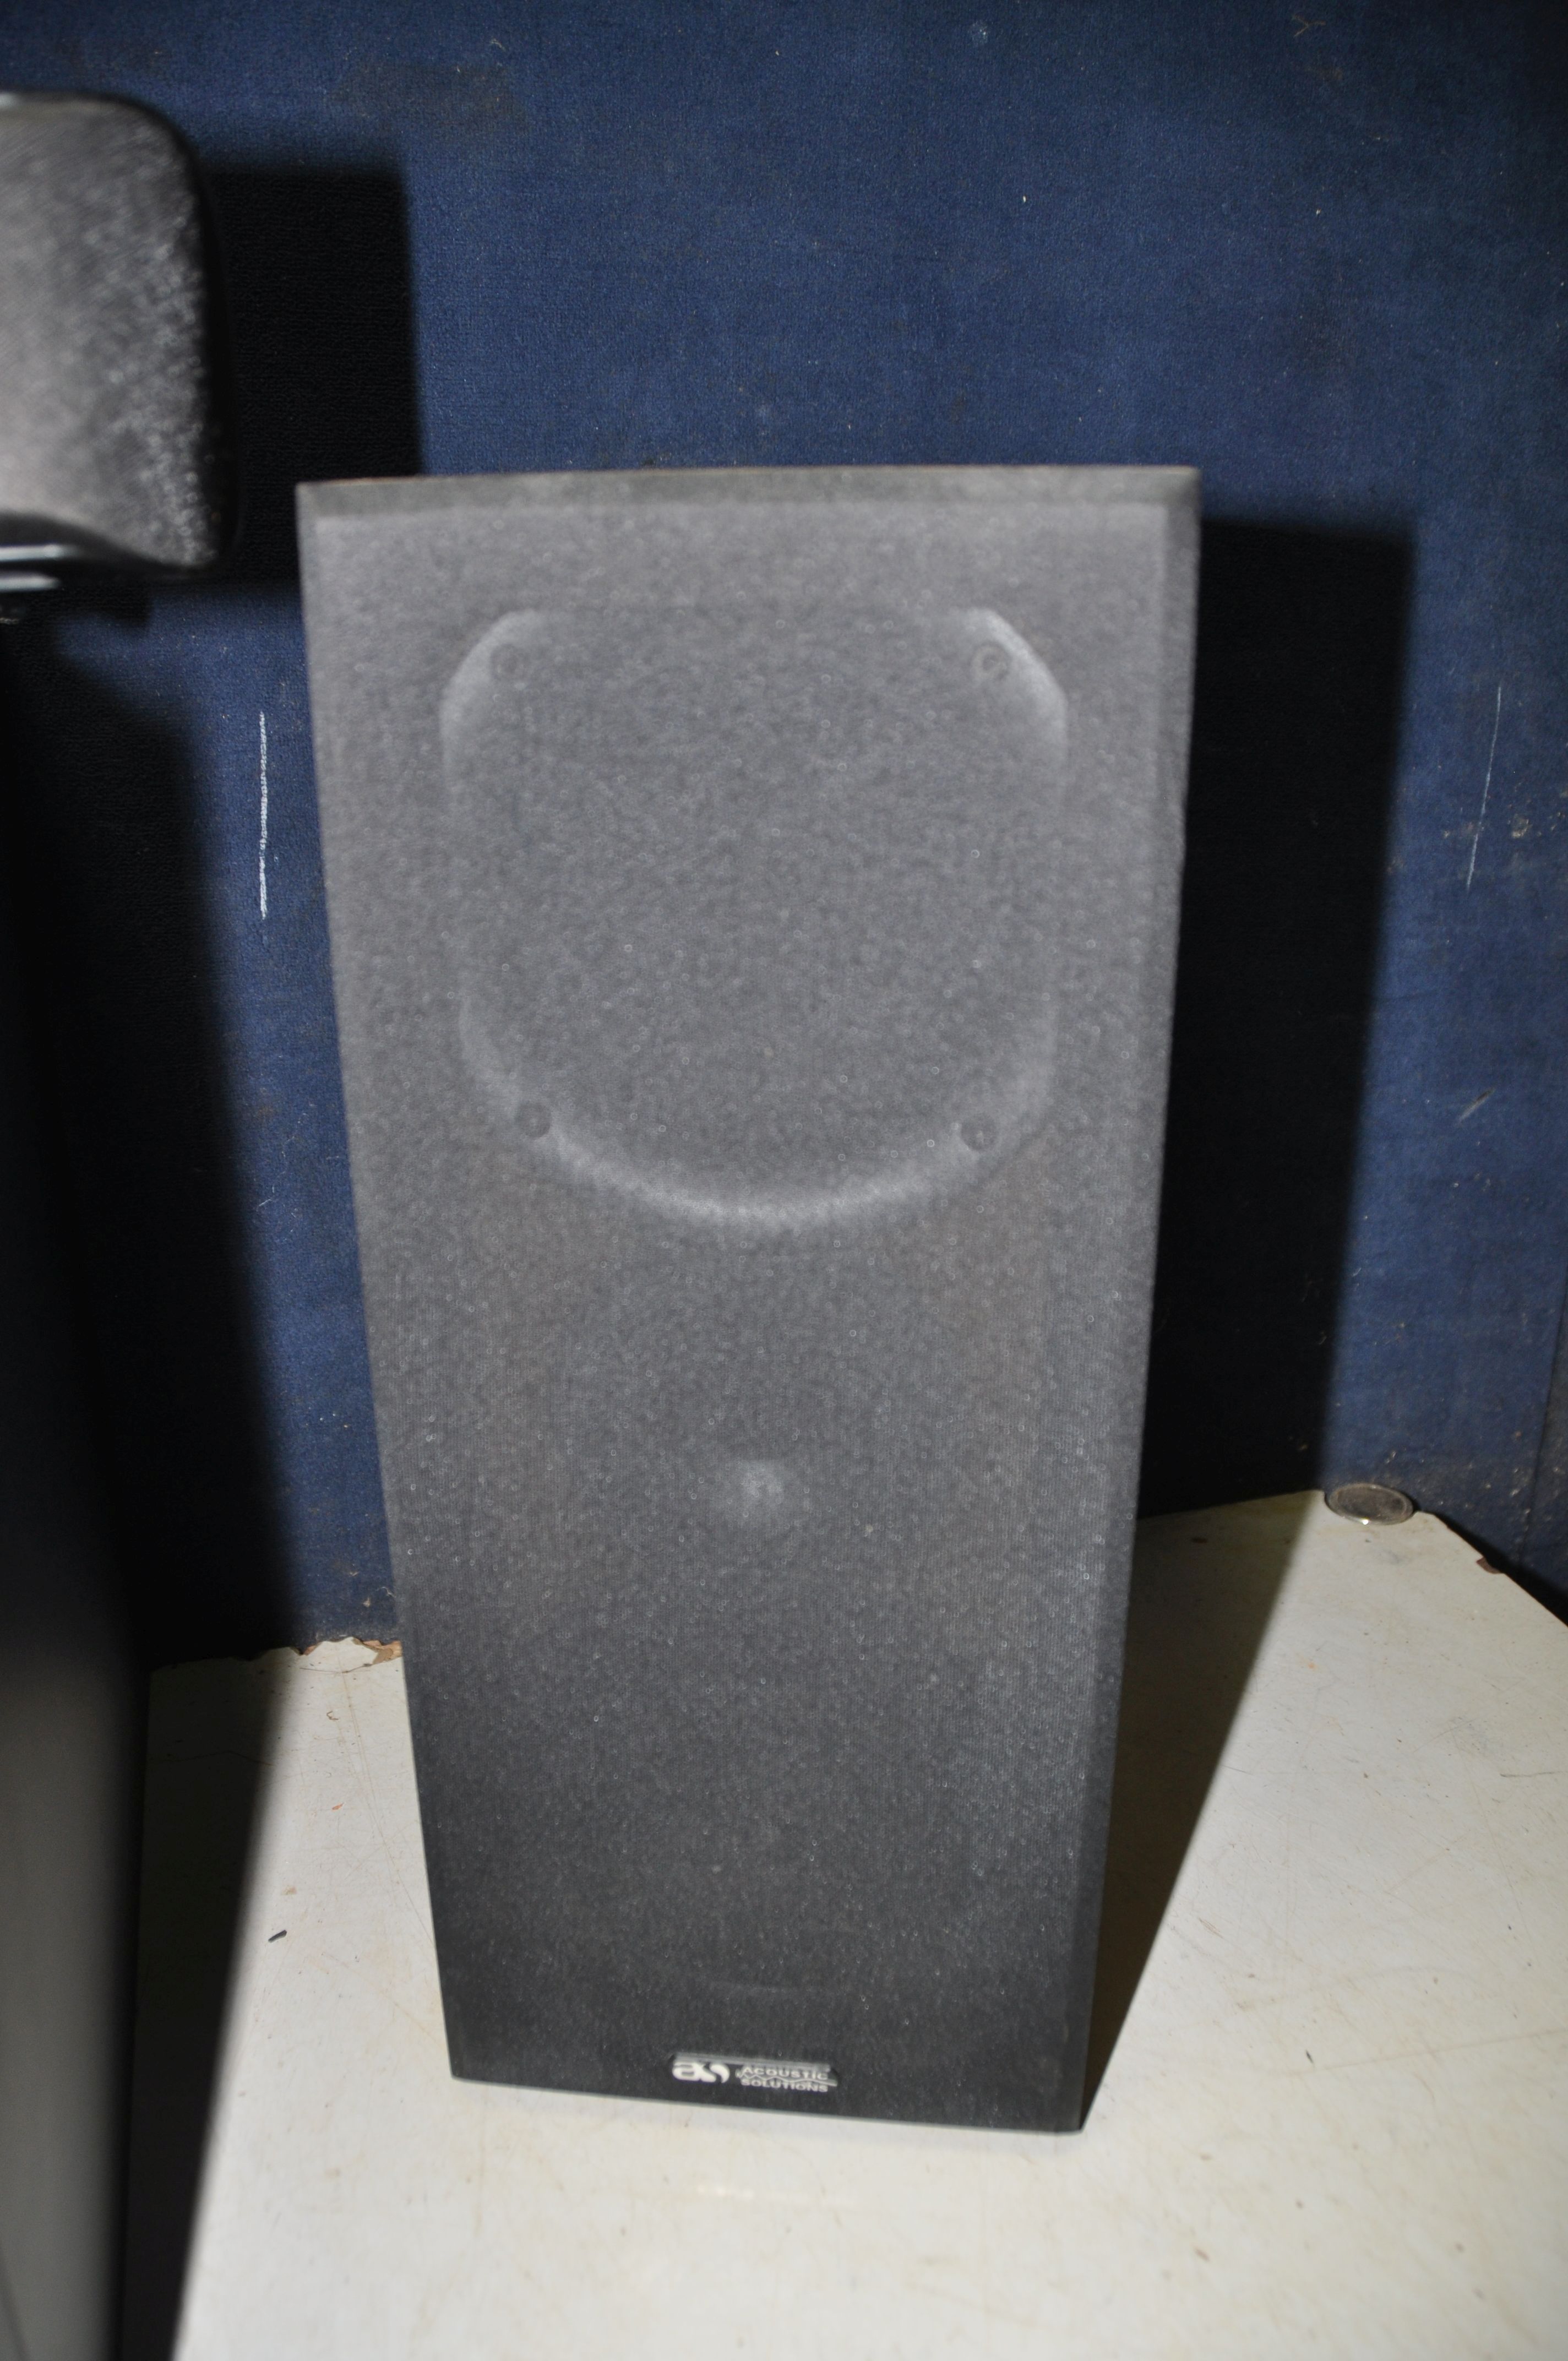 A SONY HT-G700 SUBWOOFER with a Sony SS-CNV350 speaker and a pair of Acoustic solutions AV-150B - Image 2 of 3